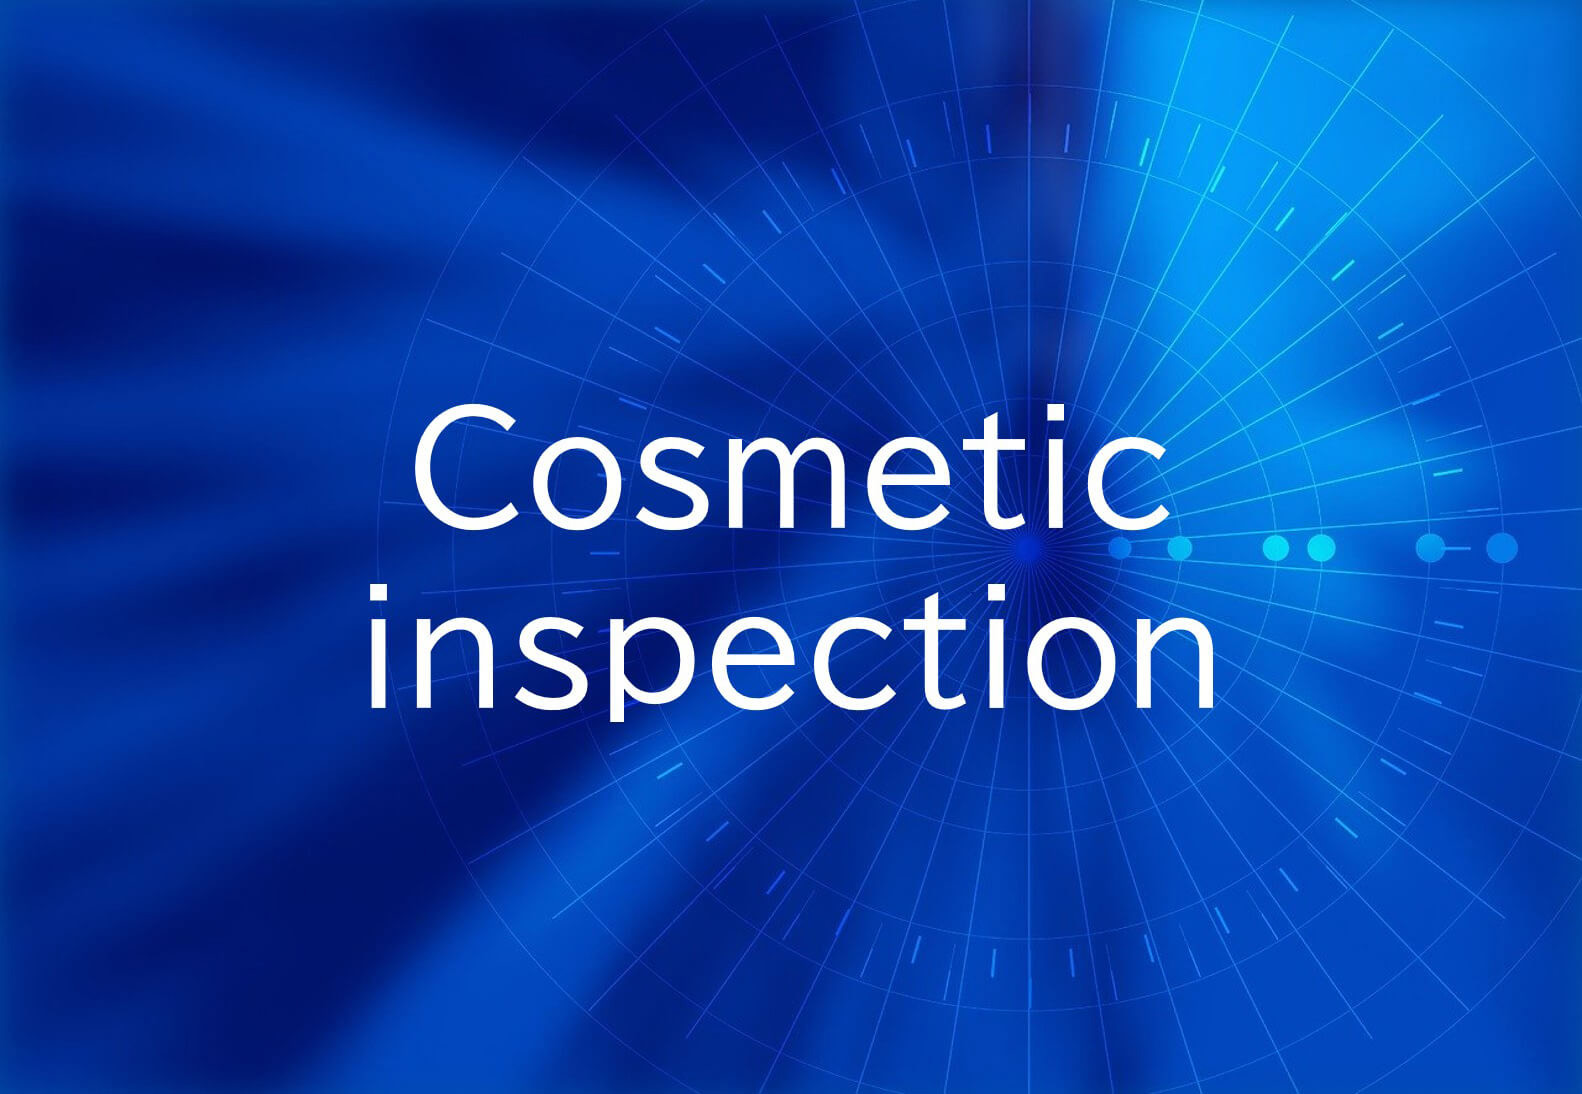 Cosmetic inspection